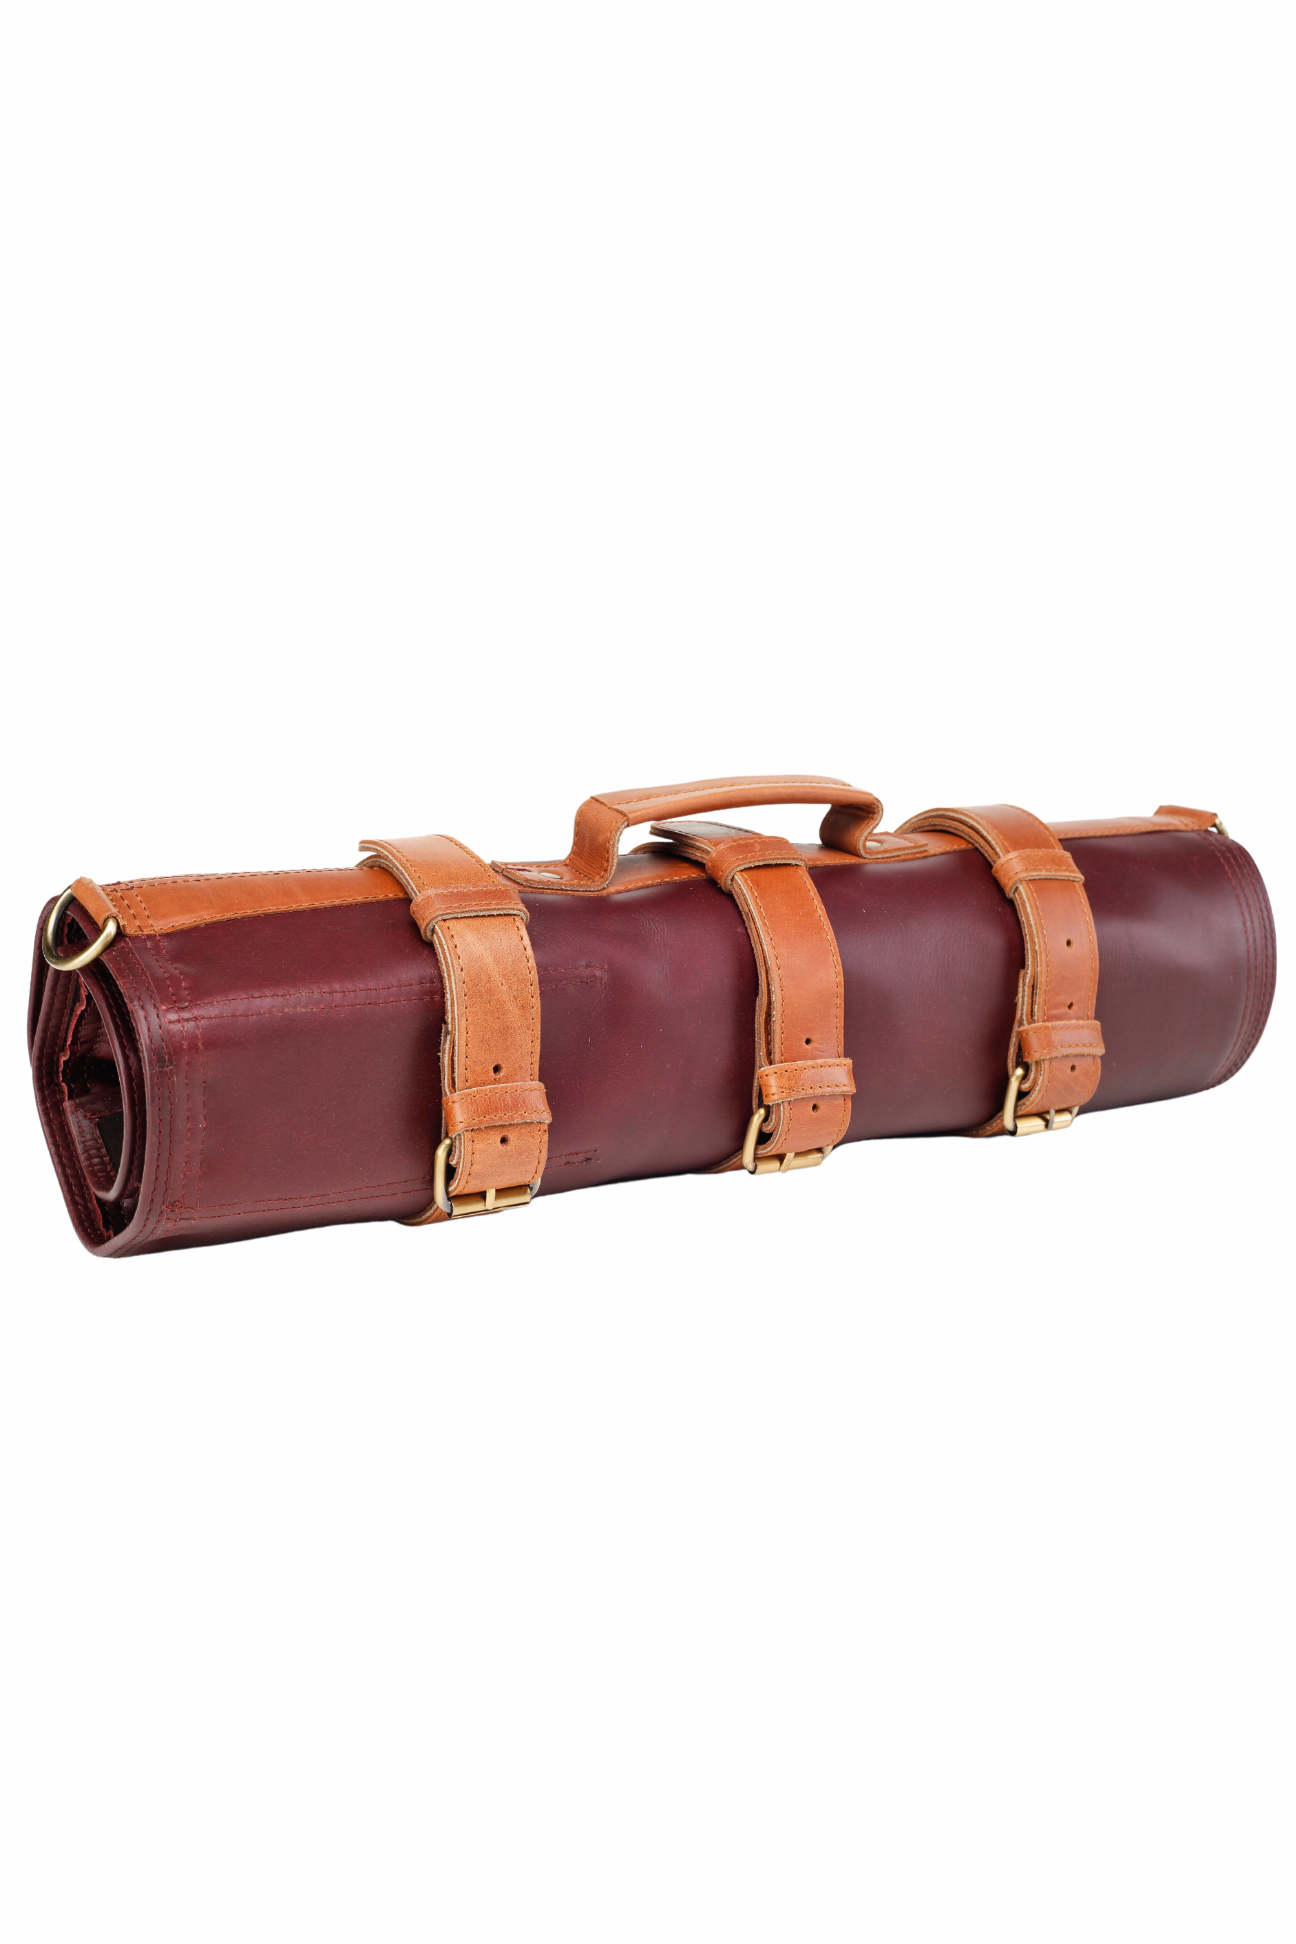 Boldric Leather Knife Bag, 17 Pocket, Brown | Cutlery and More